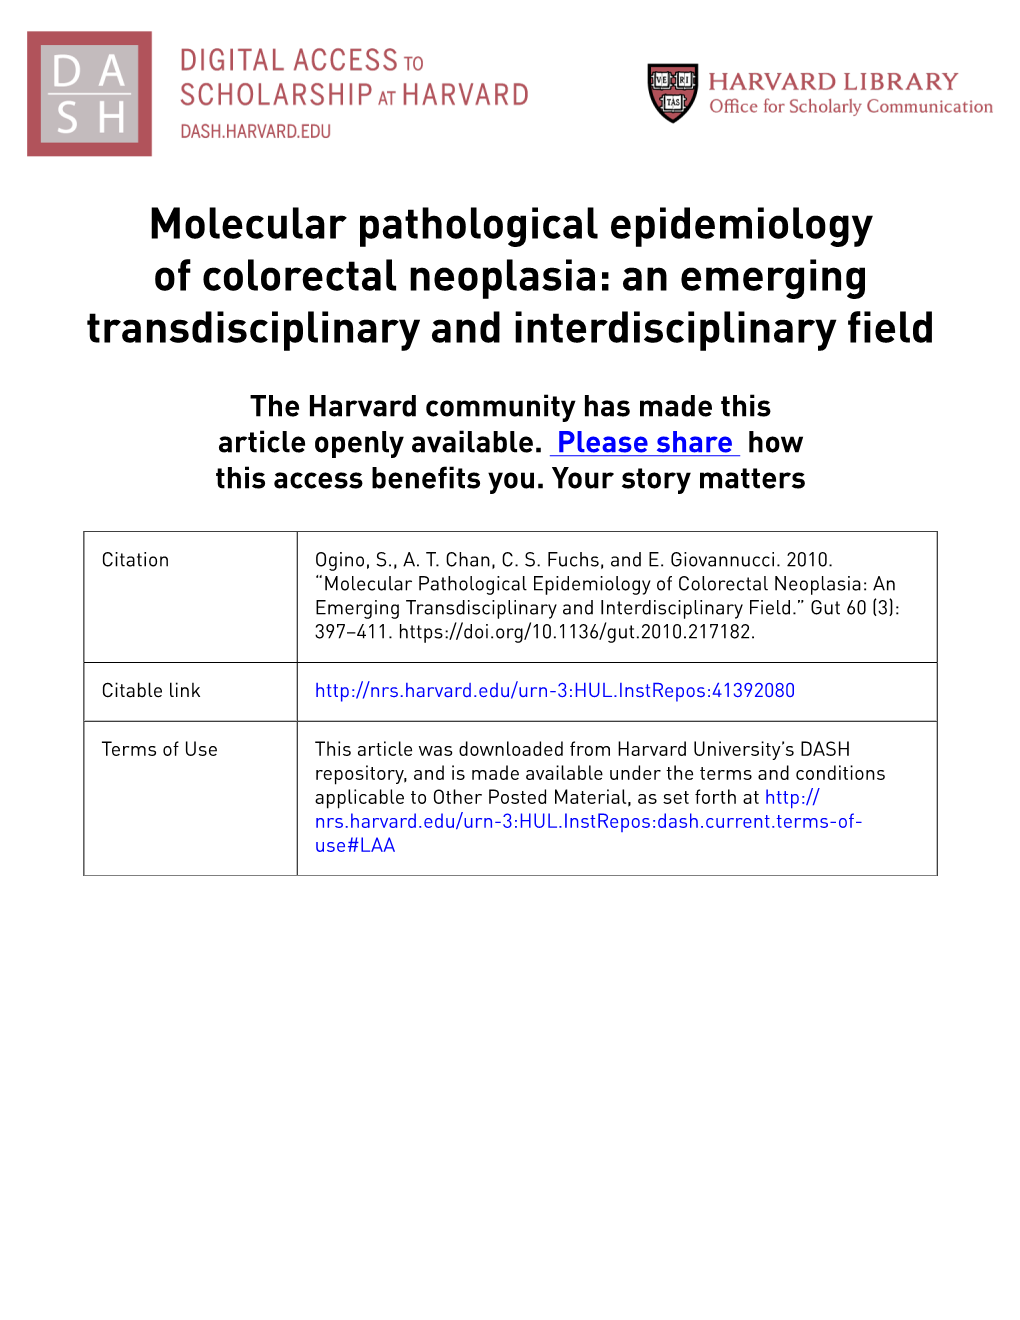 Molecular Pathological Epidemiology of Colorectal Neoplasia: an Emerging Transdisciplinary and Interdisciplinary Field